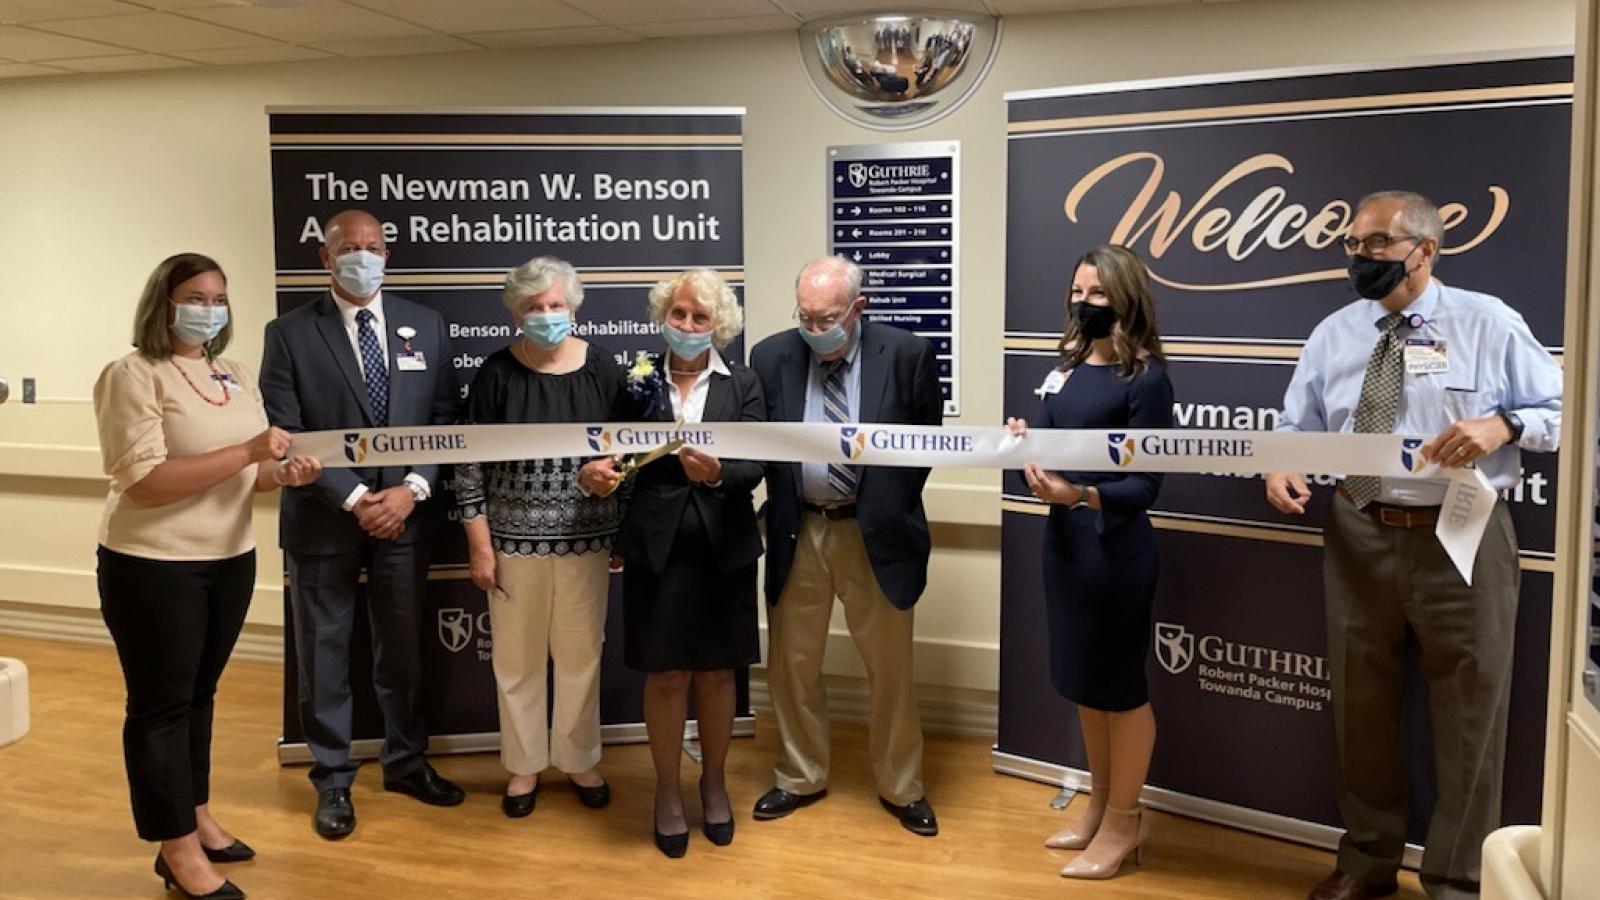 Guthrie leadership, Patricia Benson, and friends of Newman and Patricia Benson celebrate the opening of the Newman W. Benson Acute Rehabilitation Unit